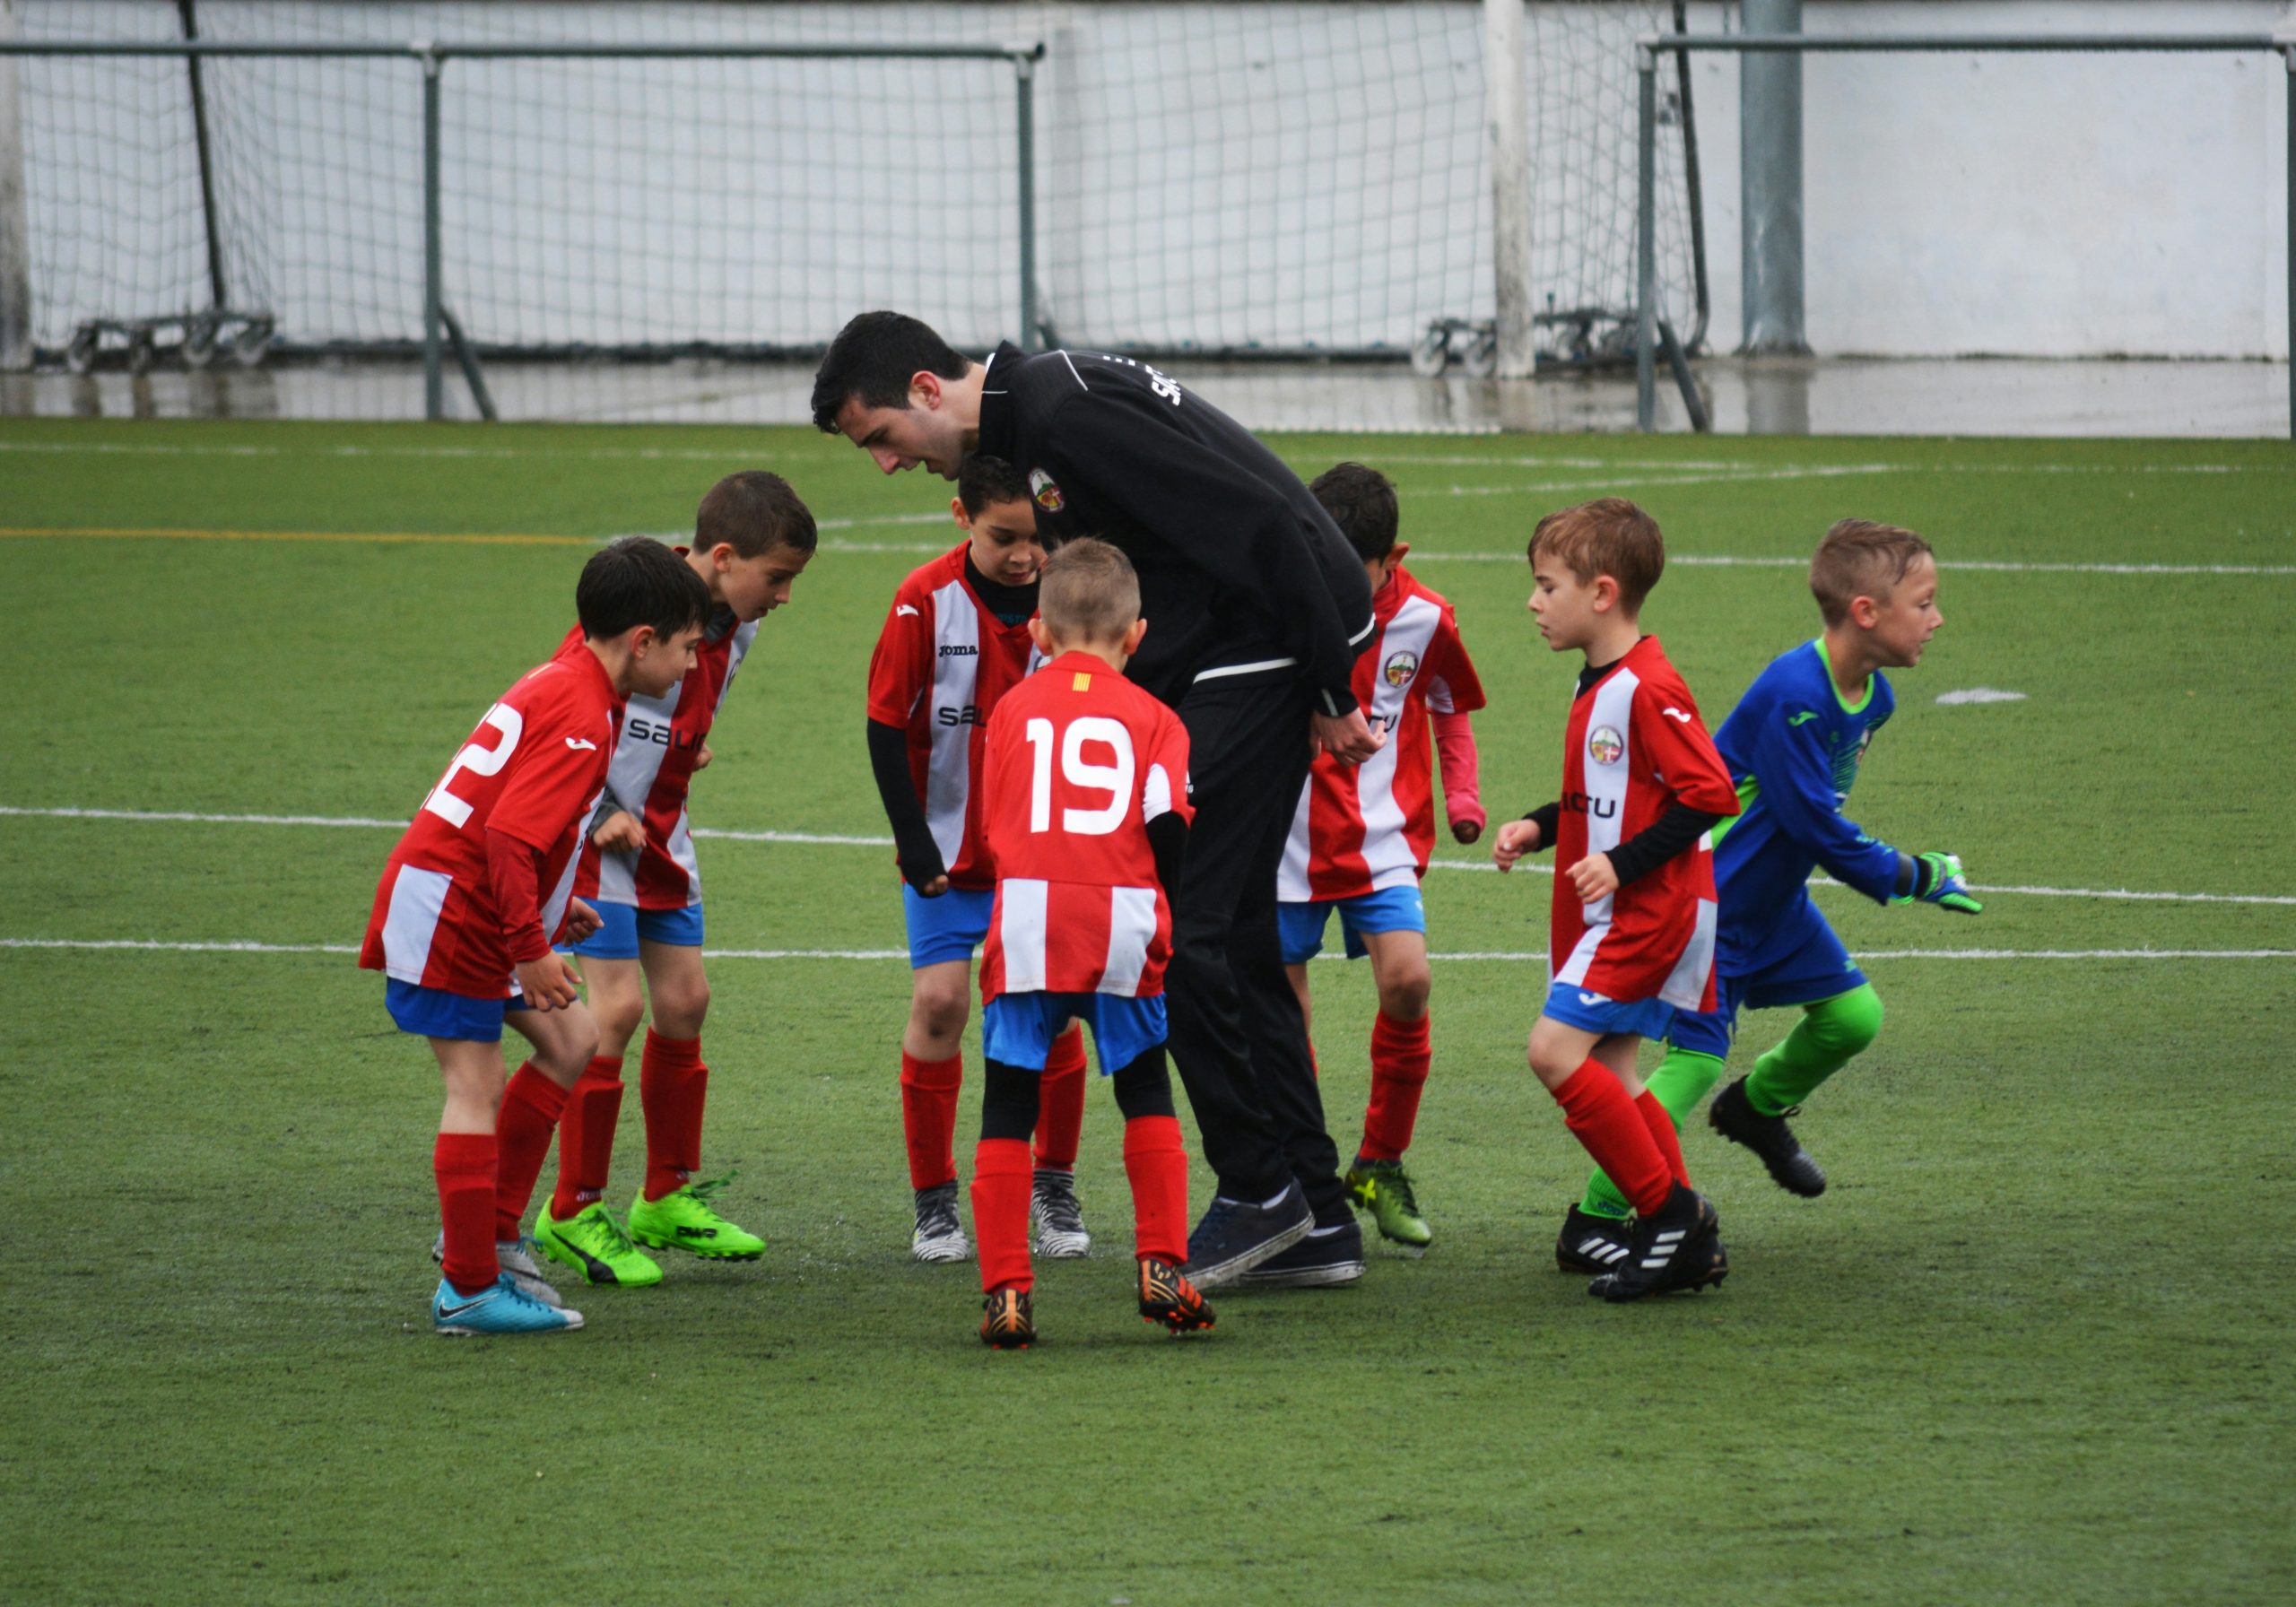 Adult coach dressed in black on the pitch with a youth soccer team in red uniforms